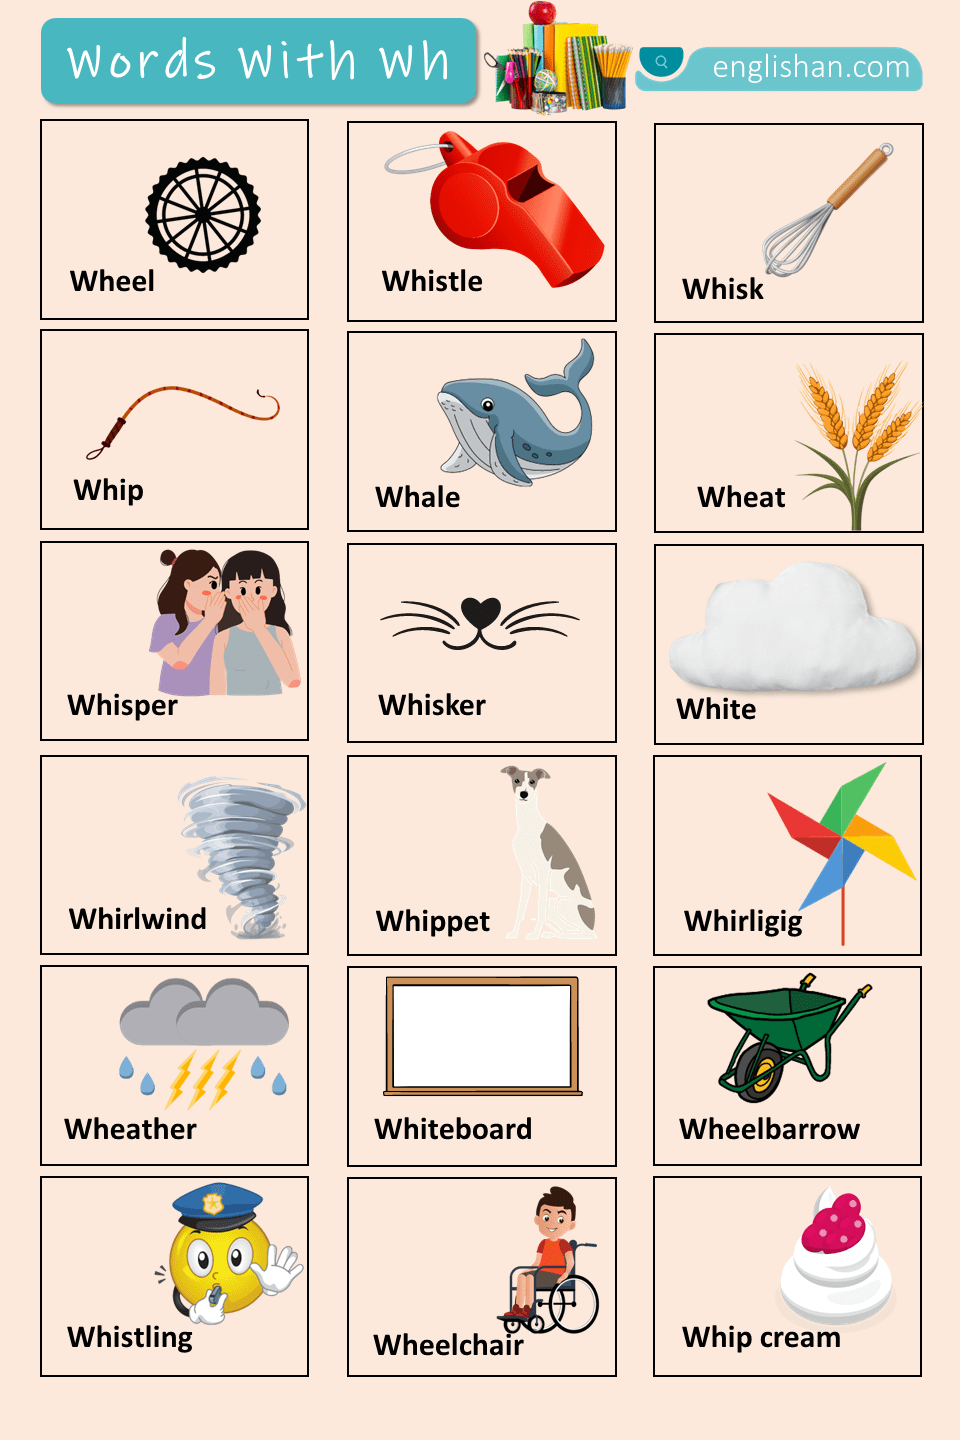 Words with Wh with Their Pictures In English